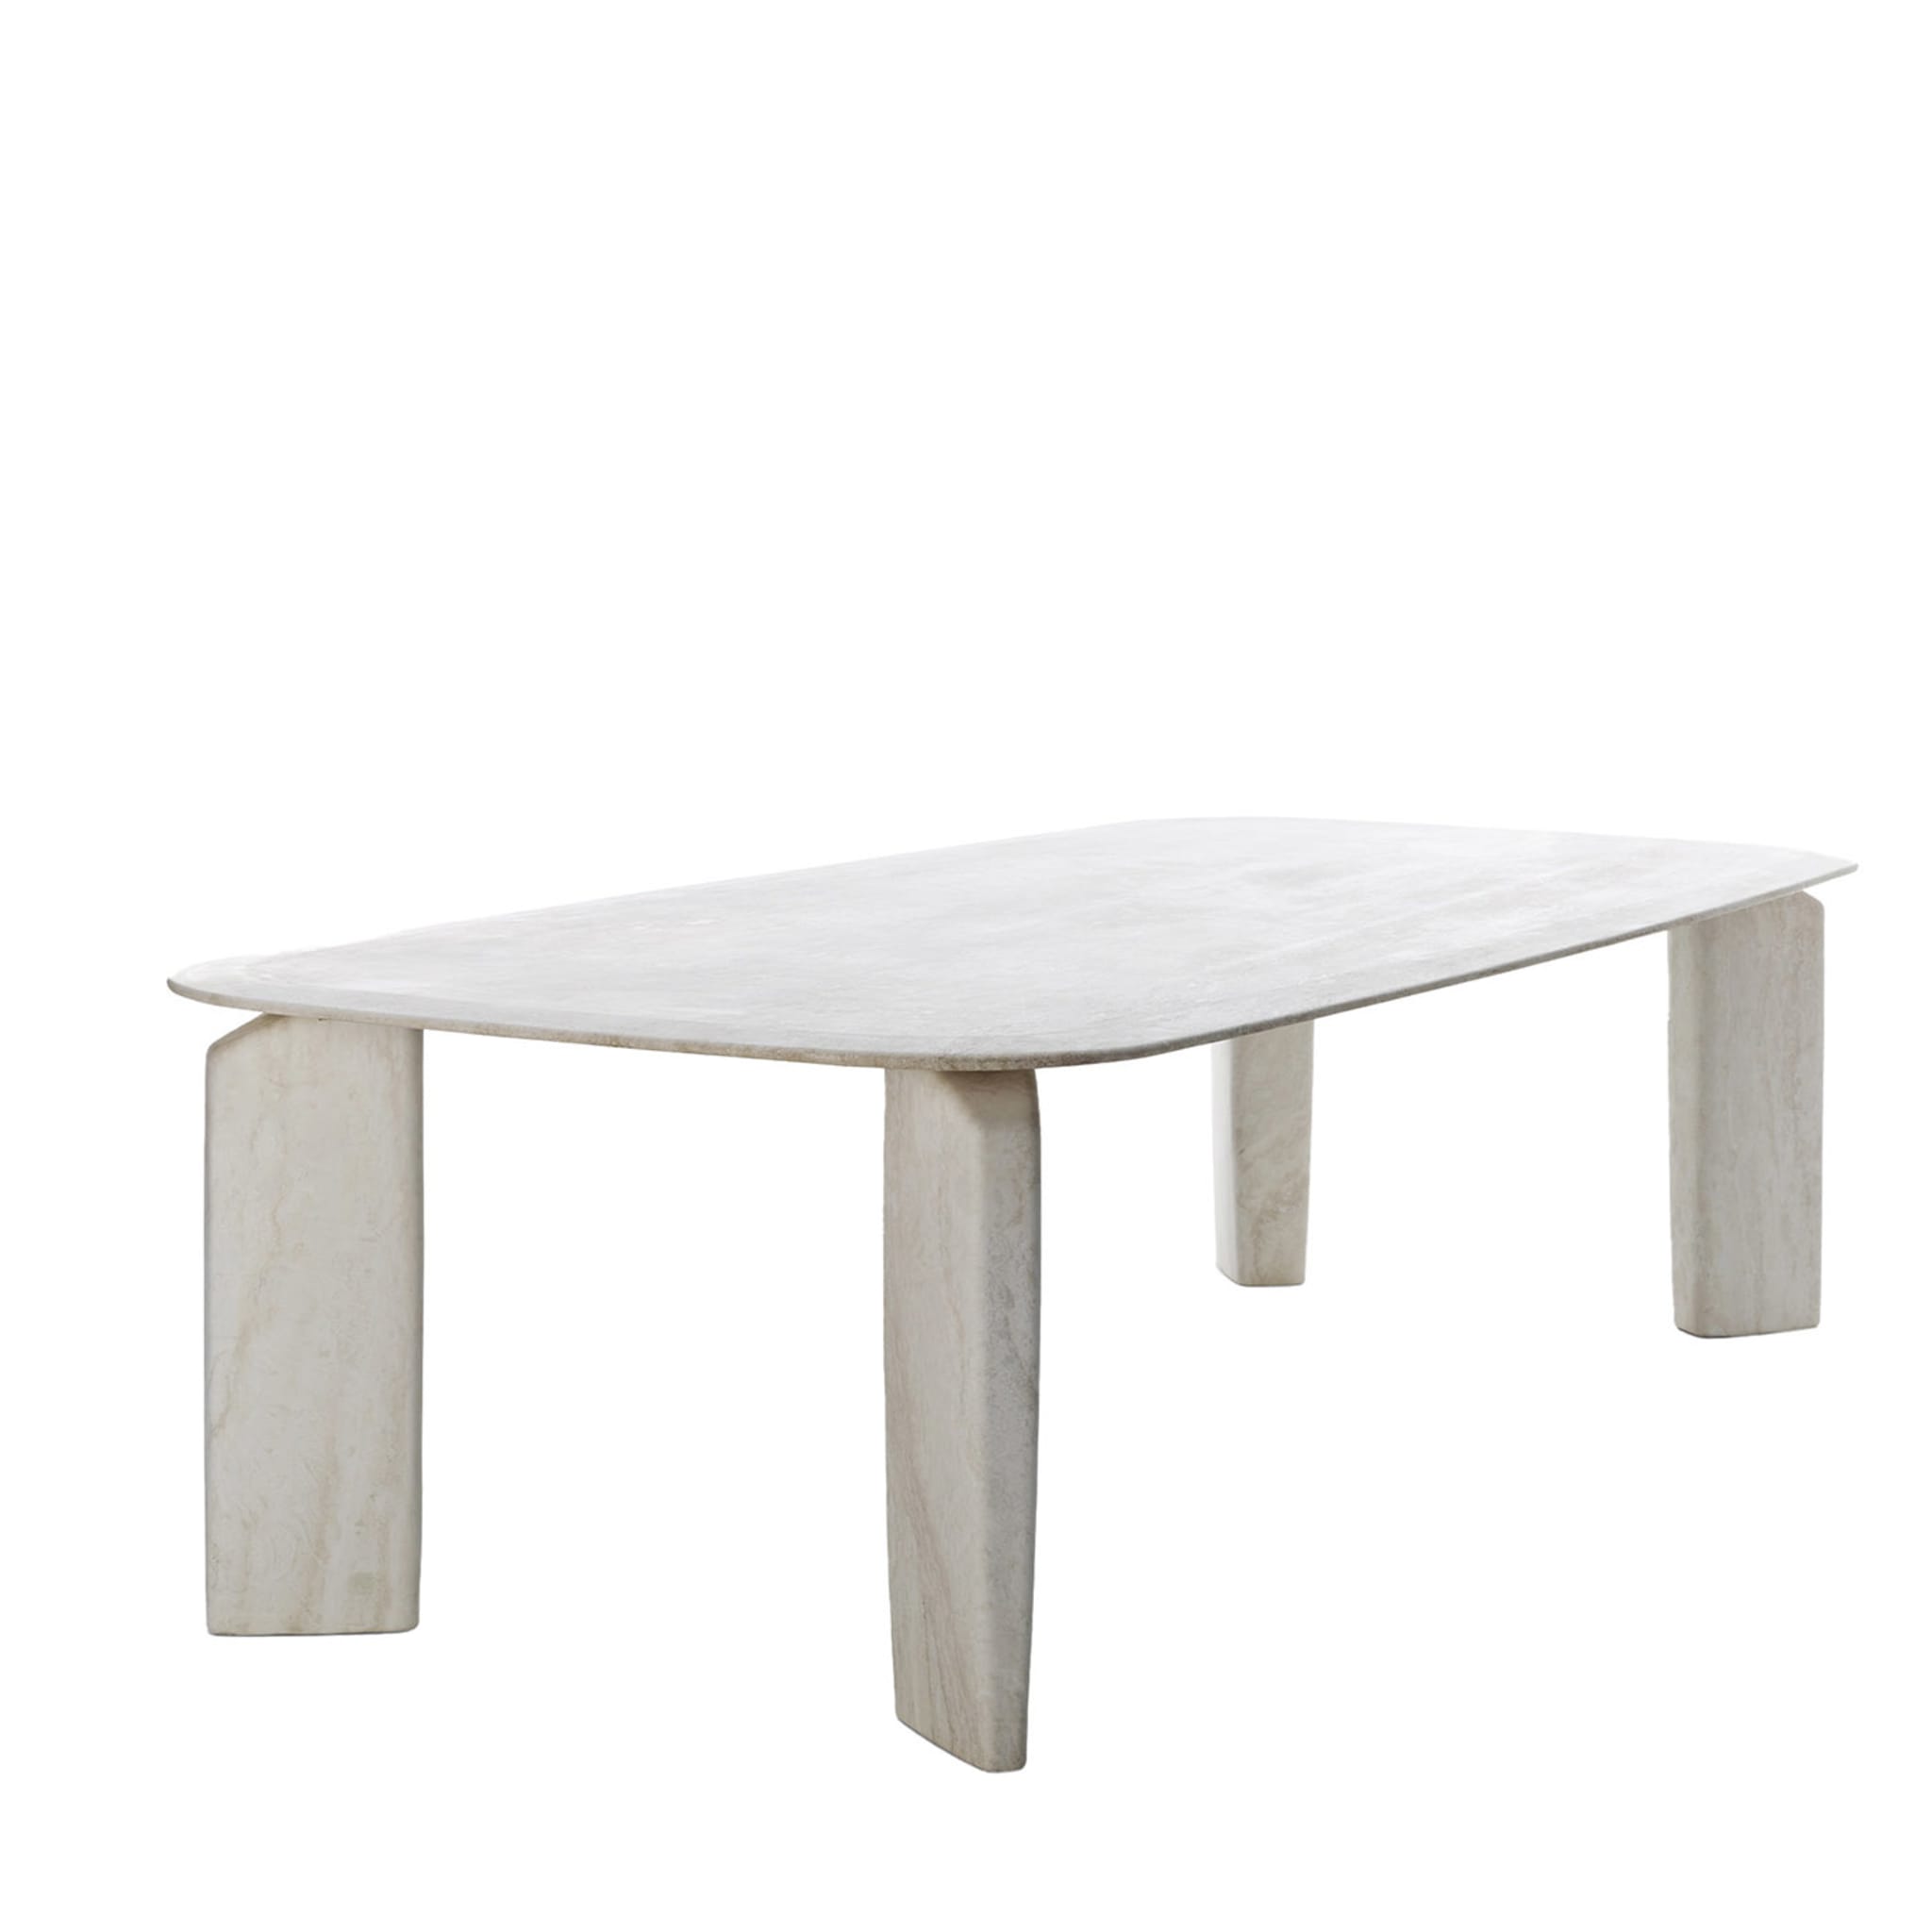 Giotto Rectangular Ostuni Table by Massimo Castagna - Main view